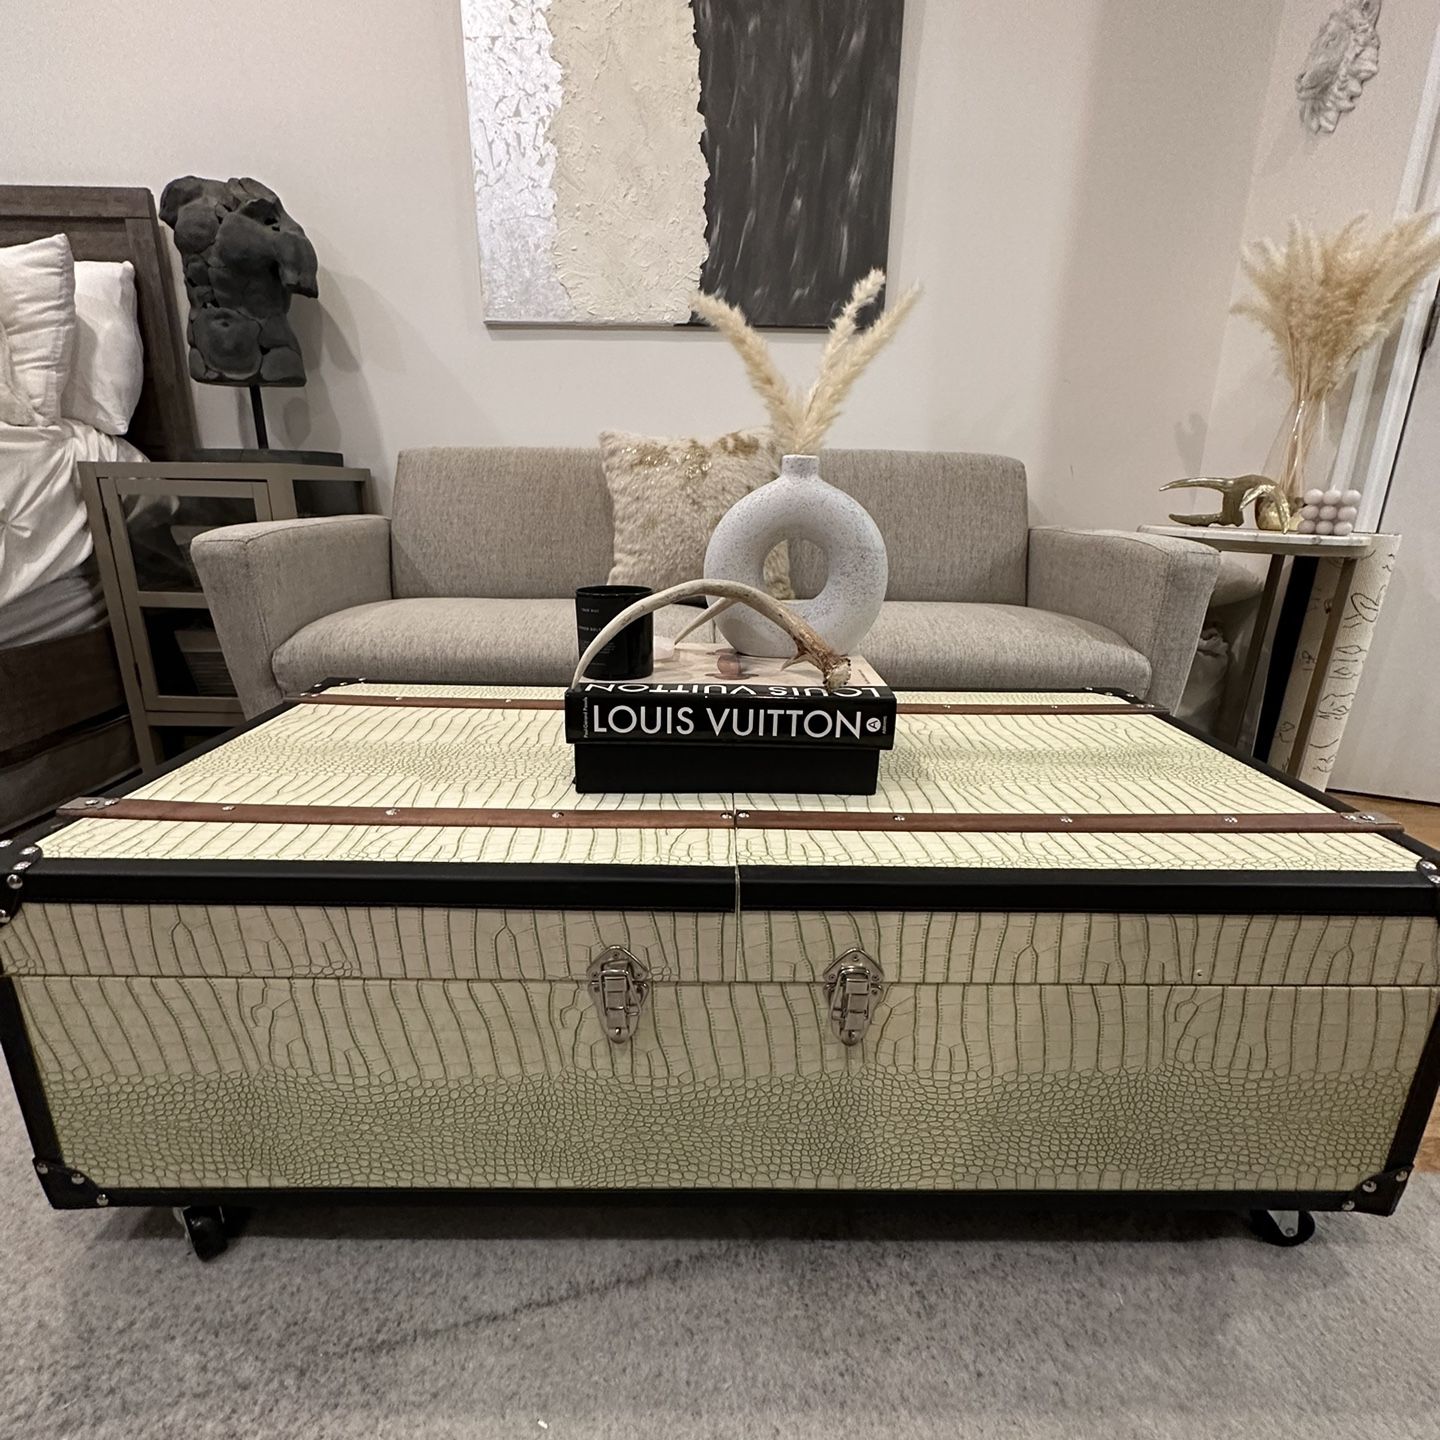 Safavieh Home Zoe Cream Faux Leather Storage Trunk Coffee Table with Wine  Rack for Sale in New York, NY - OfferUp